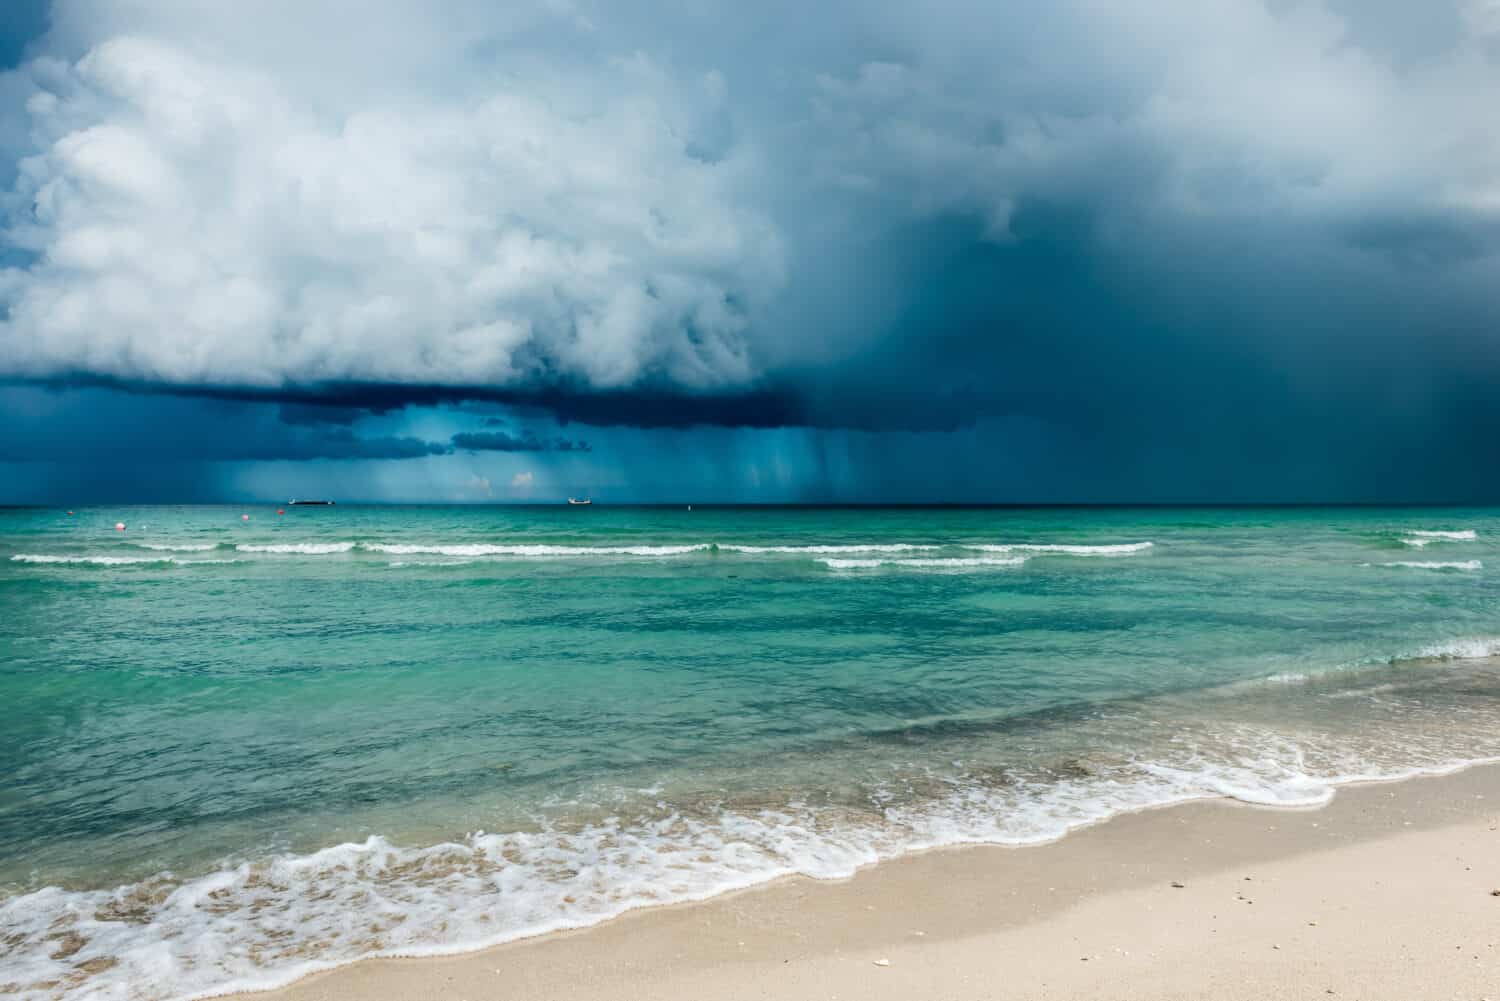 Clouds of storm over the ocean. Miami beach